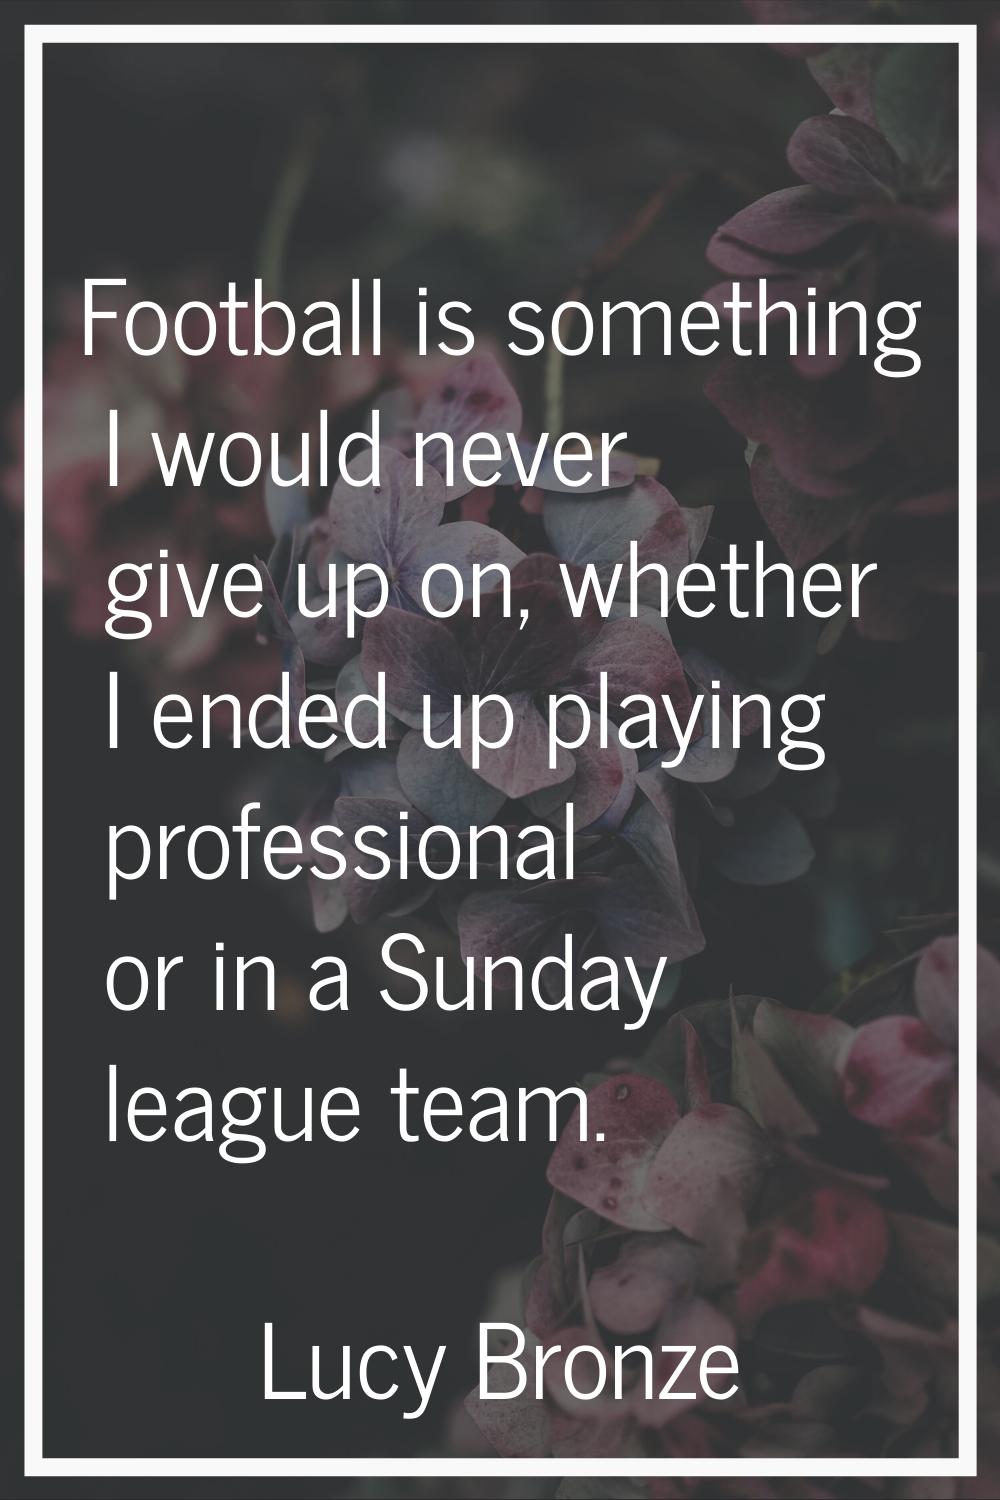 Football is something I would never give up on, whether I ended up playing professional or in a Sun